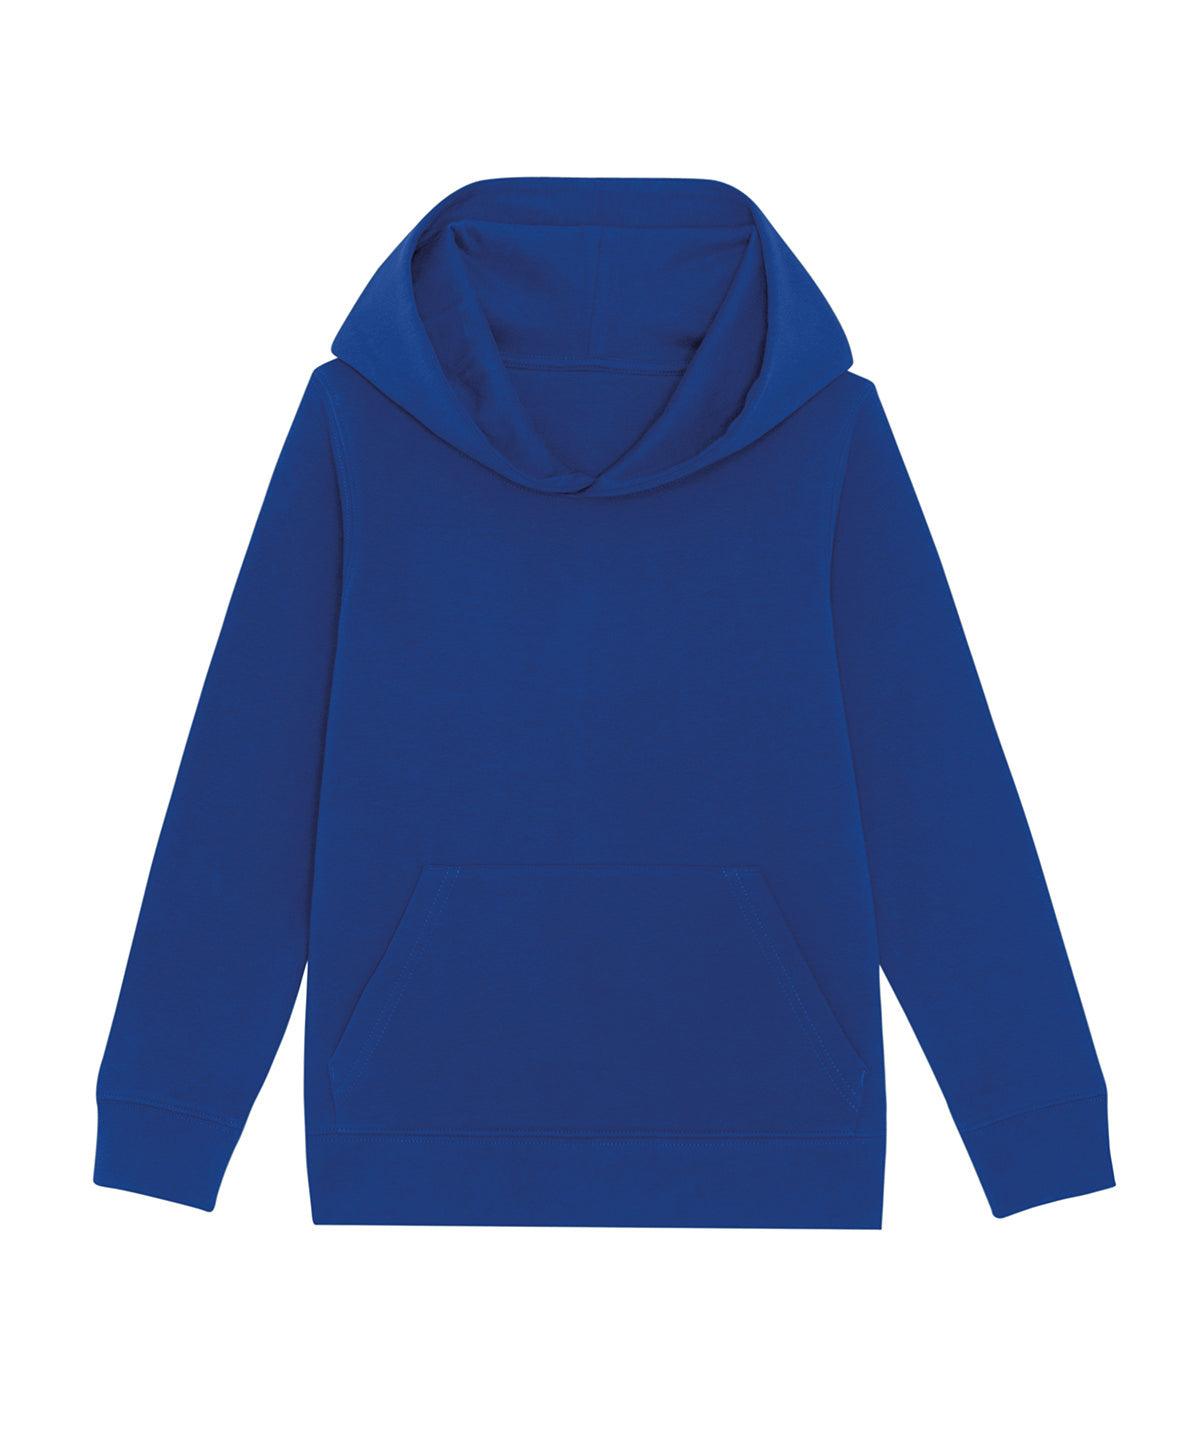 Worker Blue - Kids mini Cruiser iconic hoodie sweatshirt (STSK911) Hoodies Stanley/Stella Conscious cold weather styles, Exclusives, Hoodies, Junior, Must Haves, New Colours for 2023, Organic & Conscious, Pastels and Tie Dye, Raladeal - Recently Added, Raladeal - Stanley Stella, Recycled, Stanley/ Stella Schoolwear Centres